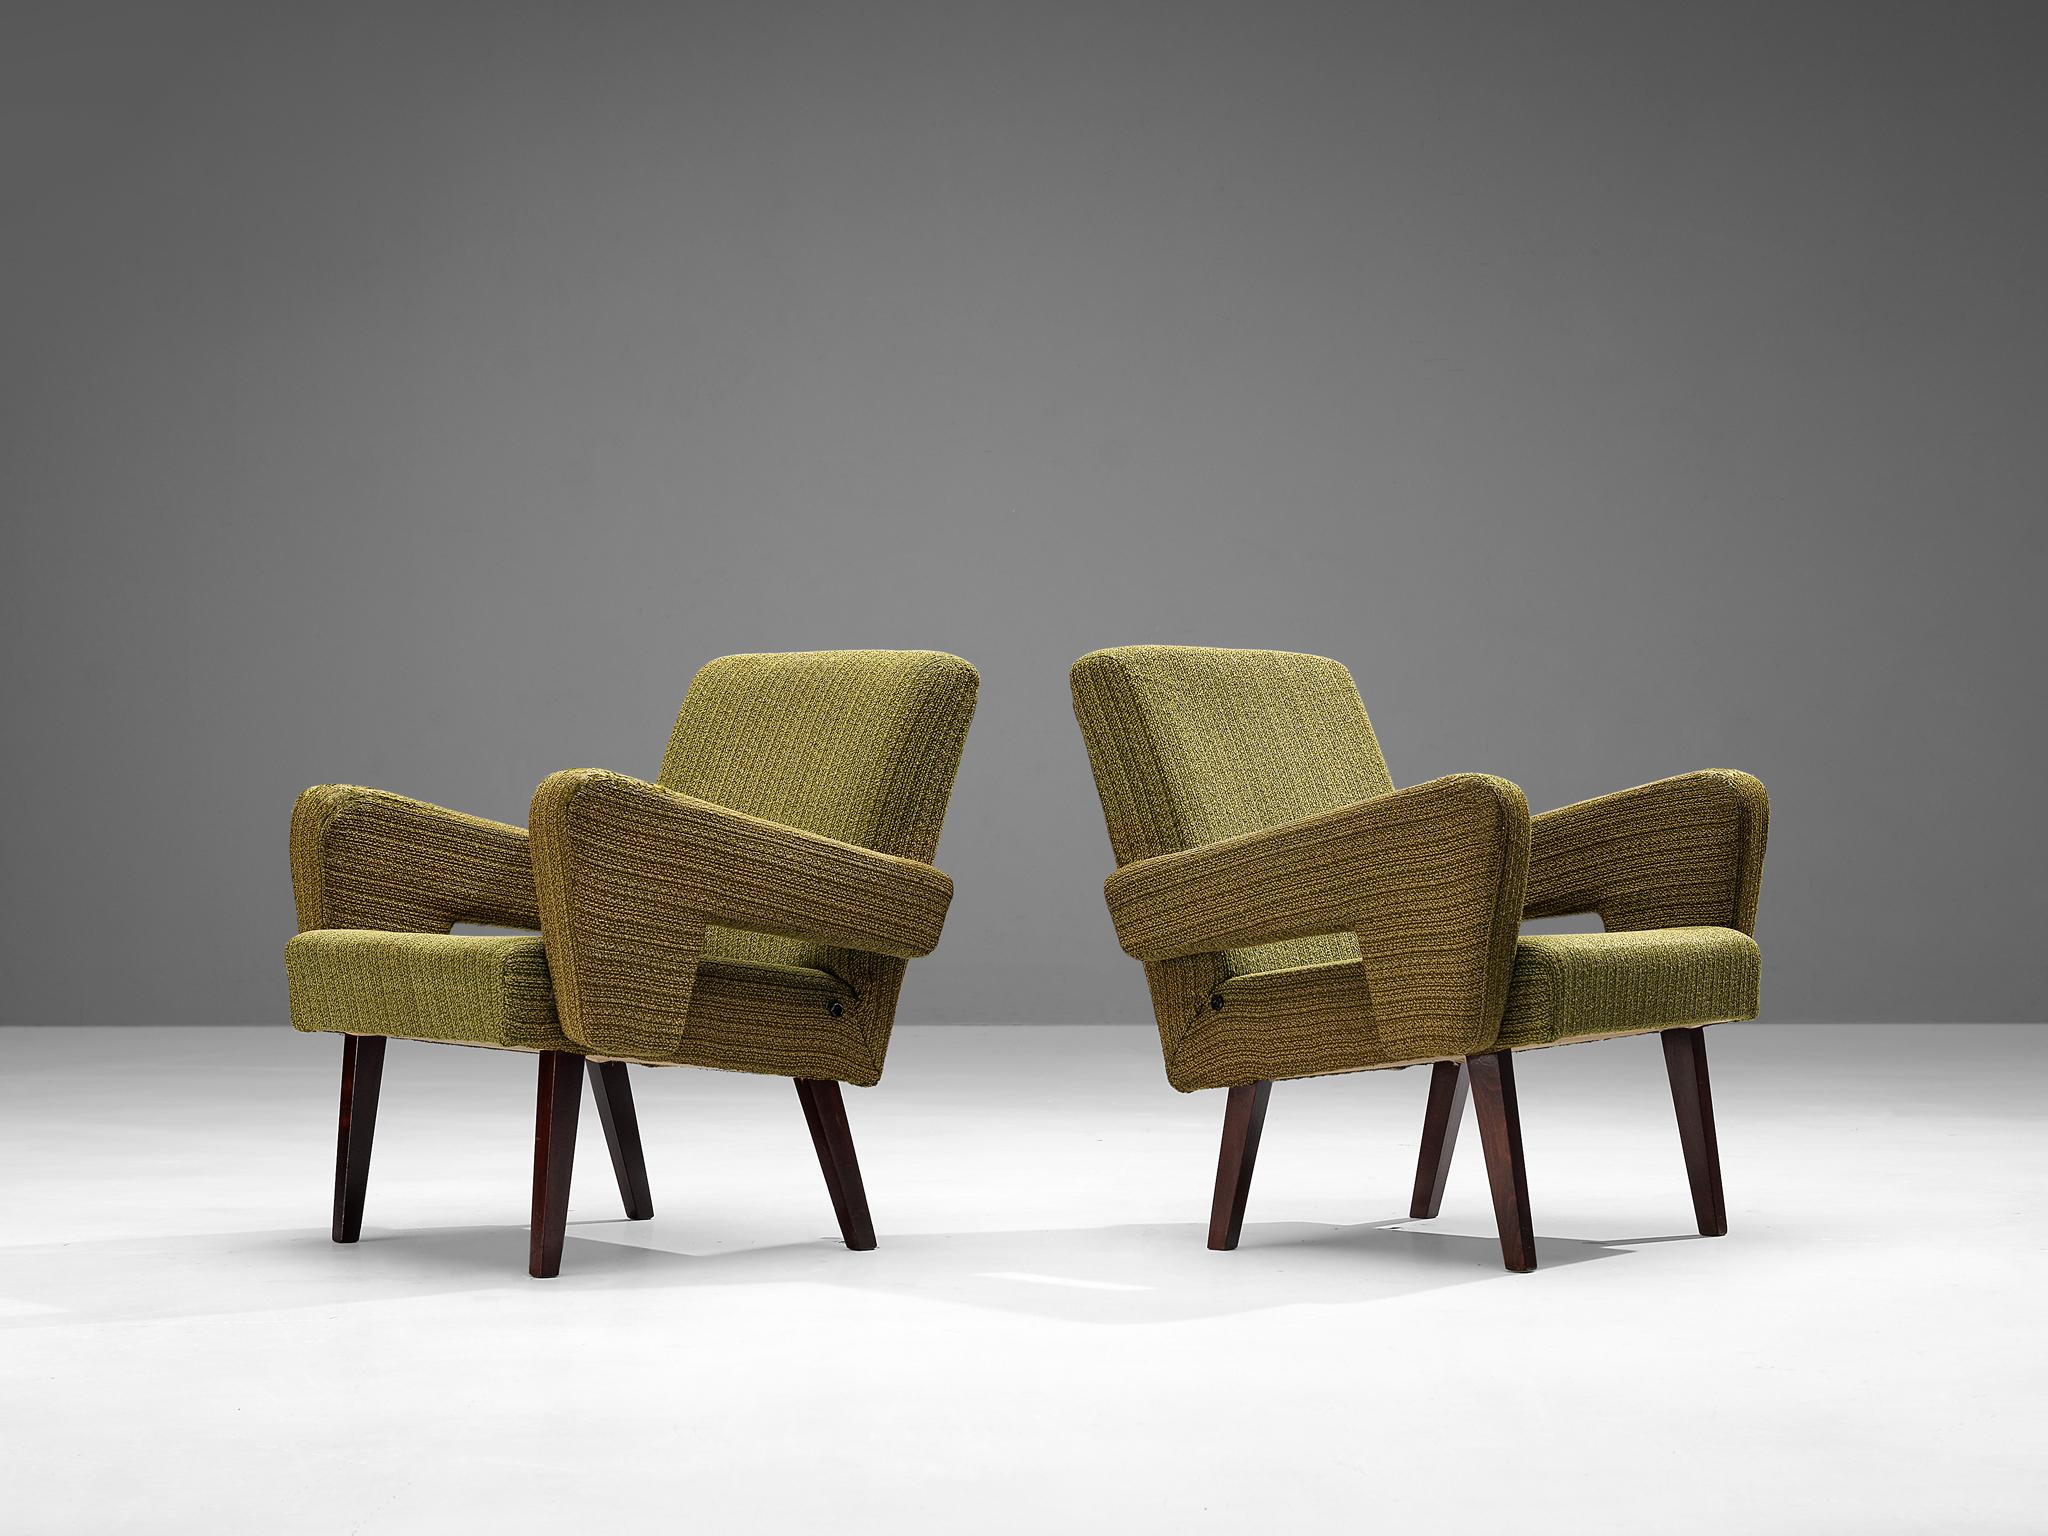 Pair of lounge chairs, fabric, stained beech, Czech Republic, 1960s

These well-proportioned armchairs are clear in their appearance with angular shapes and striking lines dominating the layout. A noticeable feature are the armrests that gradually